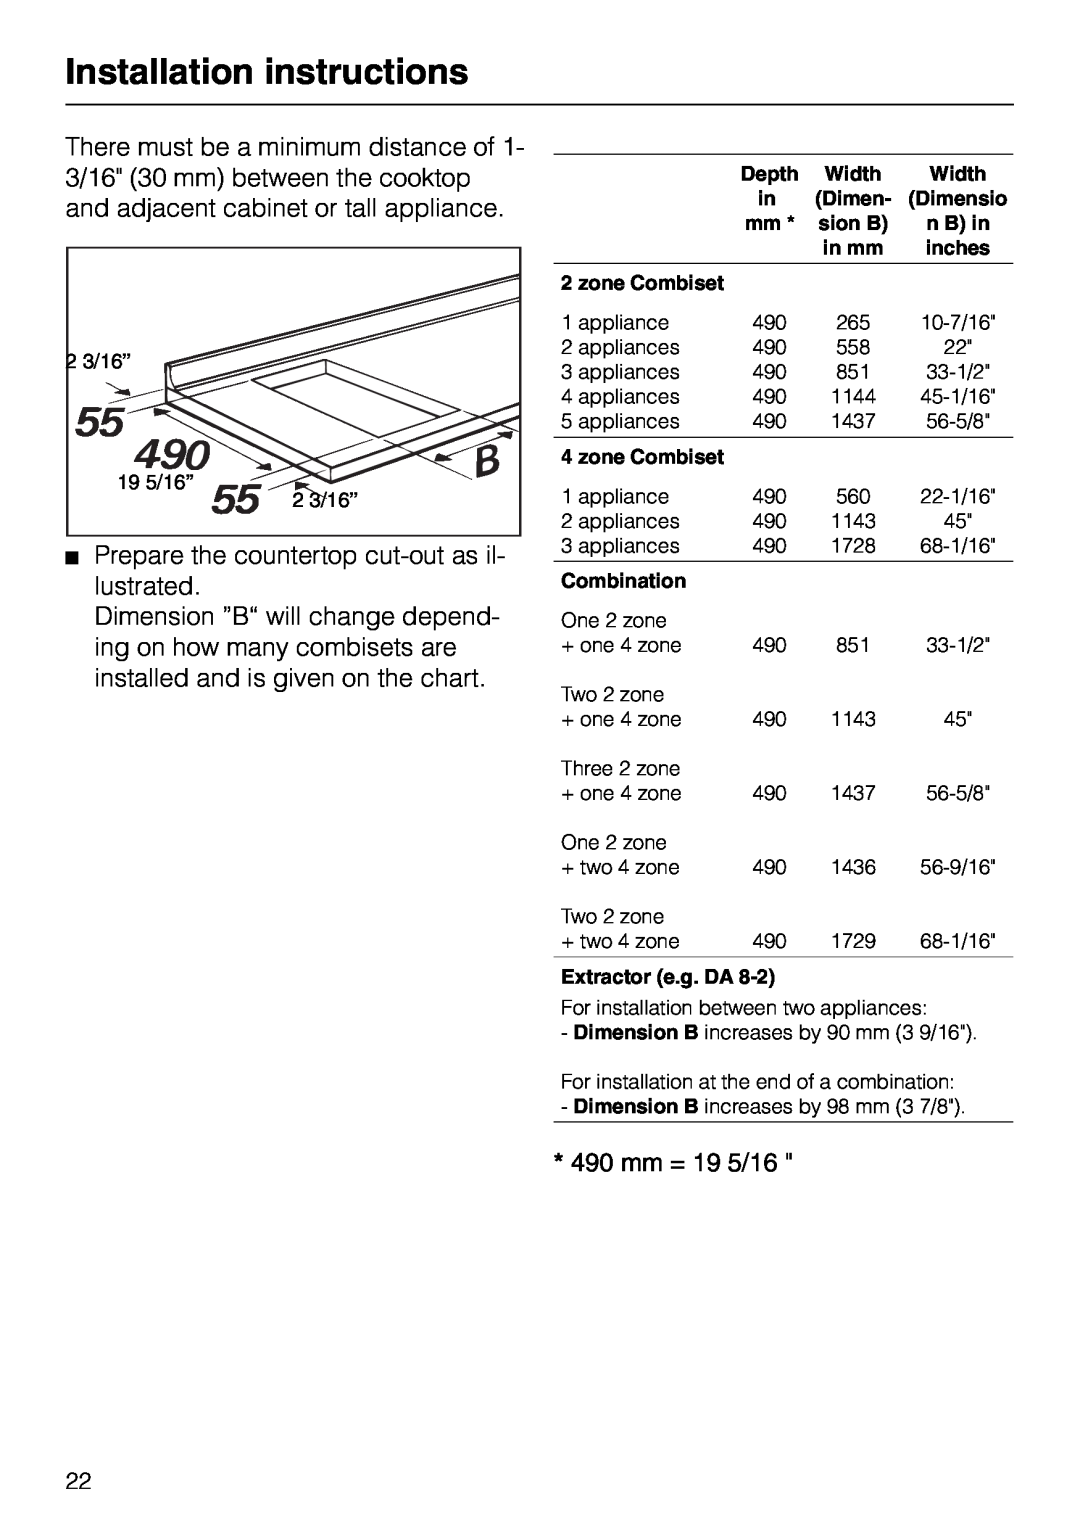 Miele KM84-2 Installation instructions, Prepare the countertop cut-out as il- lustrated, 490 mm = 19 5/16, Combination 